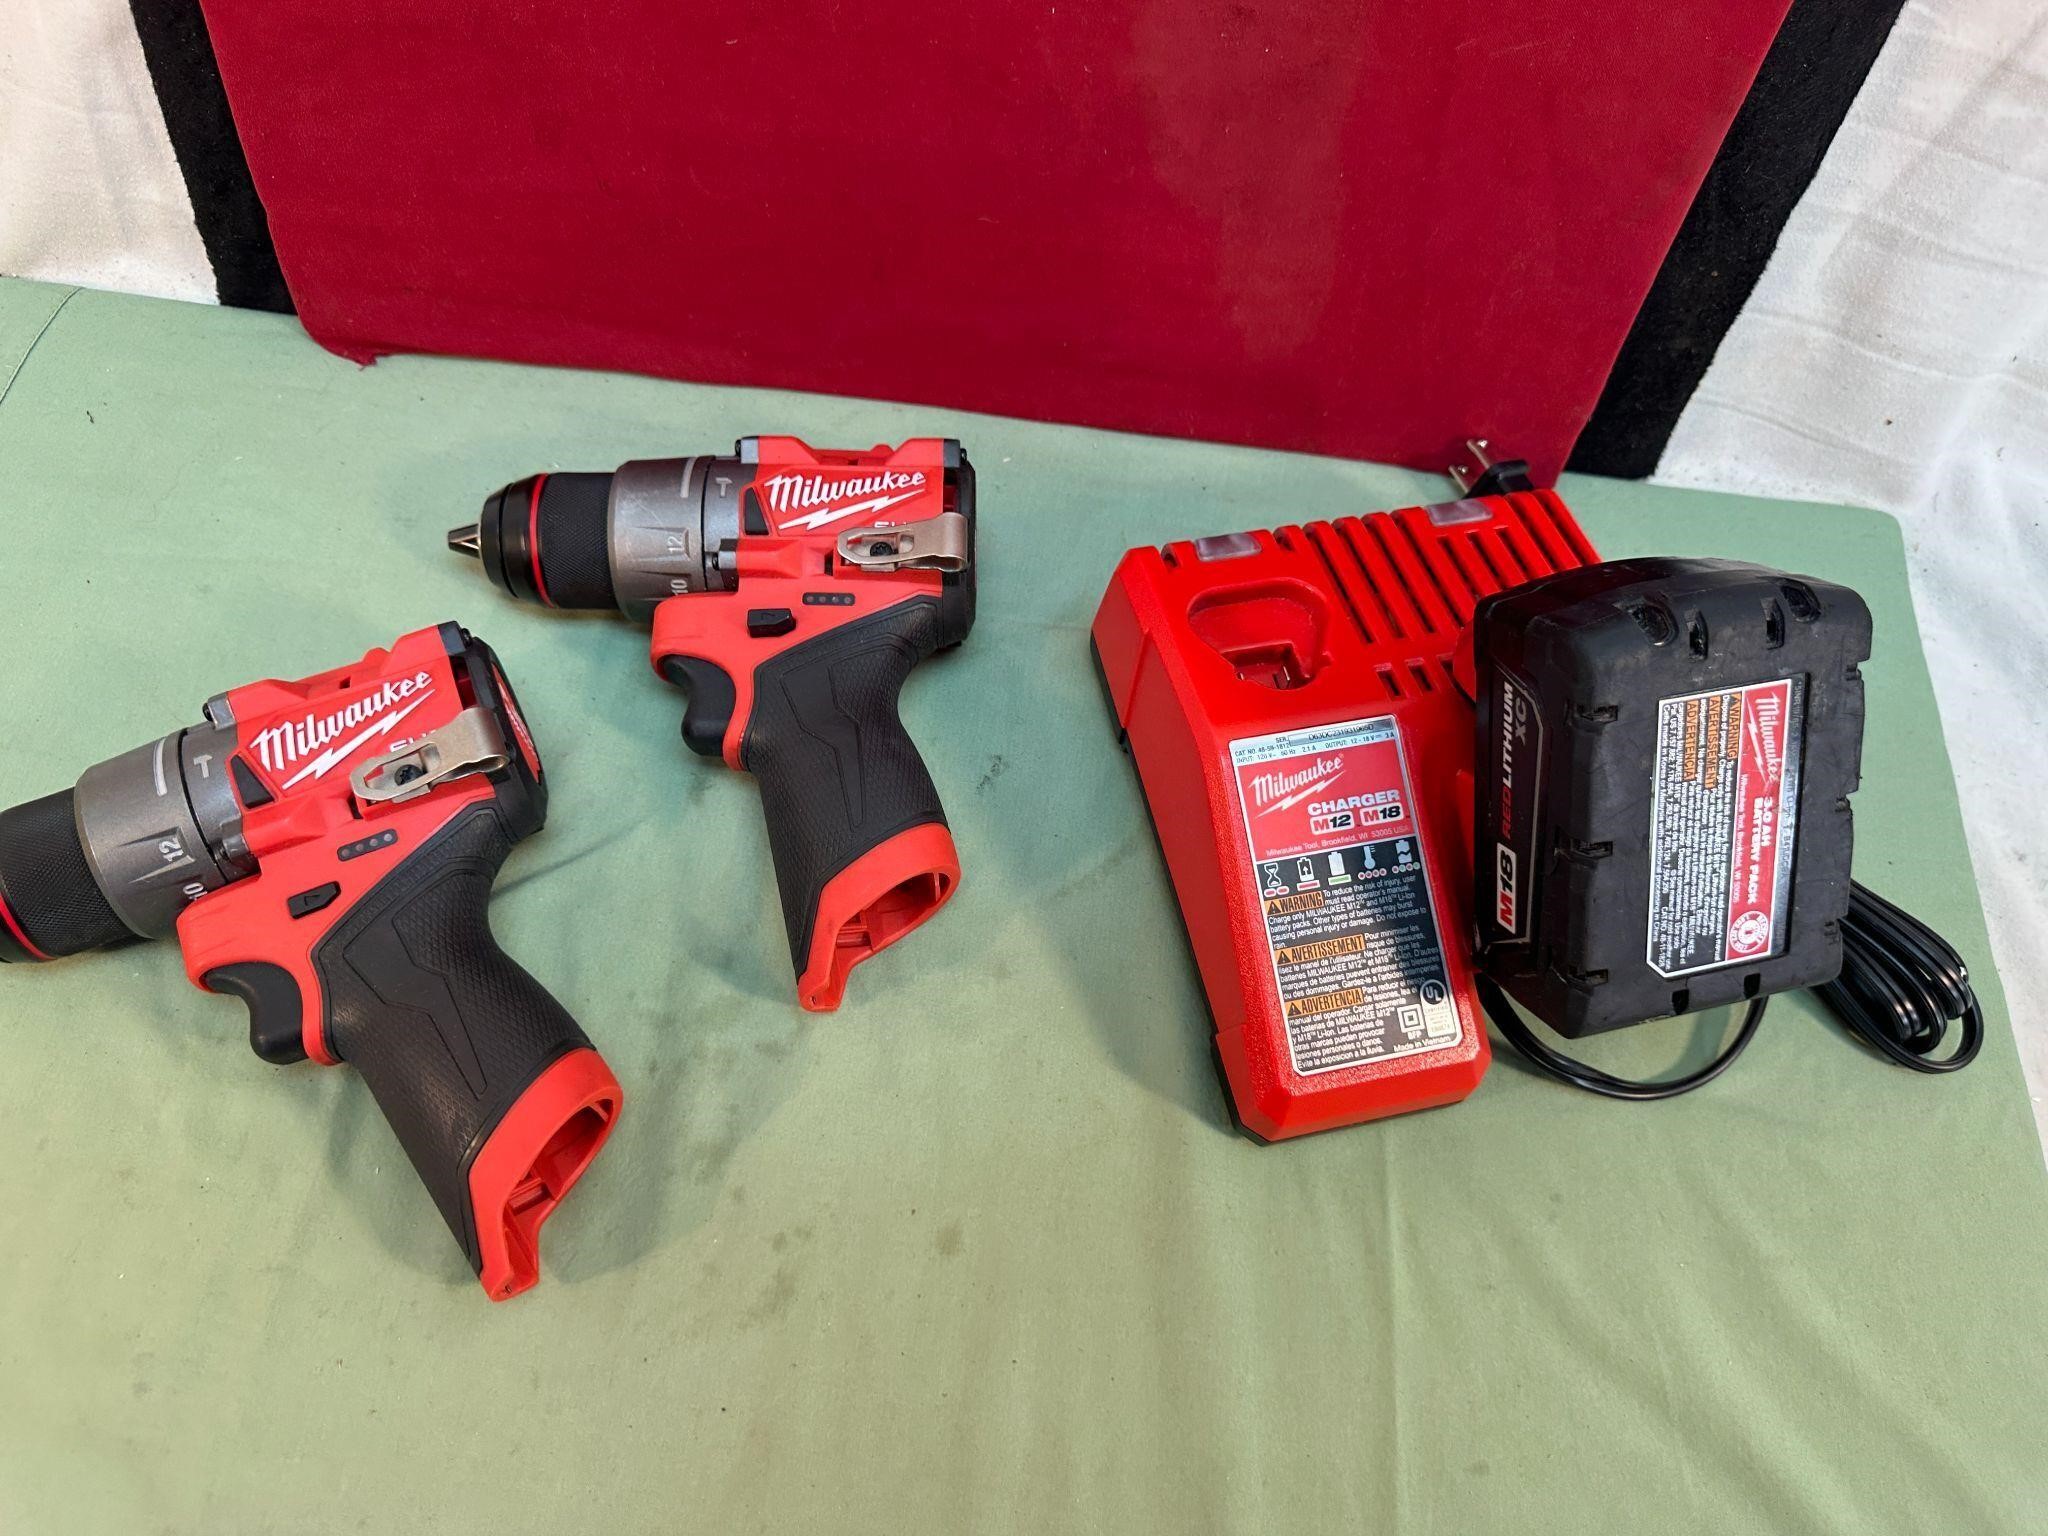 MILWAUKEE M18 CHARGER, BATTERY & 2 HAMMER DRILL